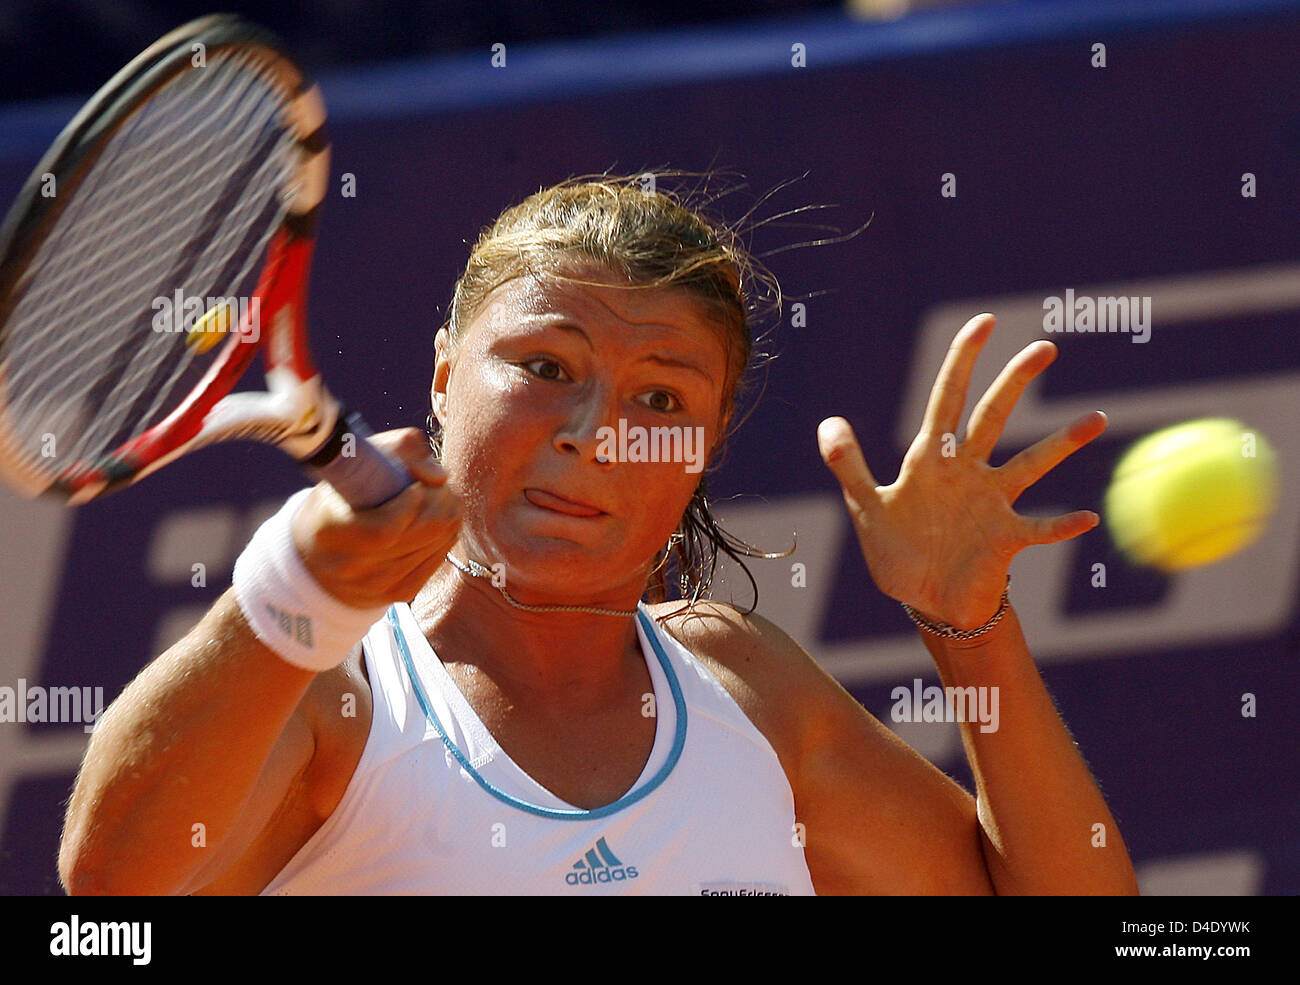 Tennis Wta Berlin High Resolution Stock Photography and Images - Alamy